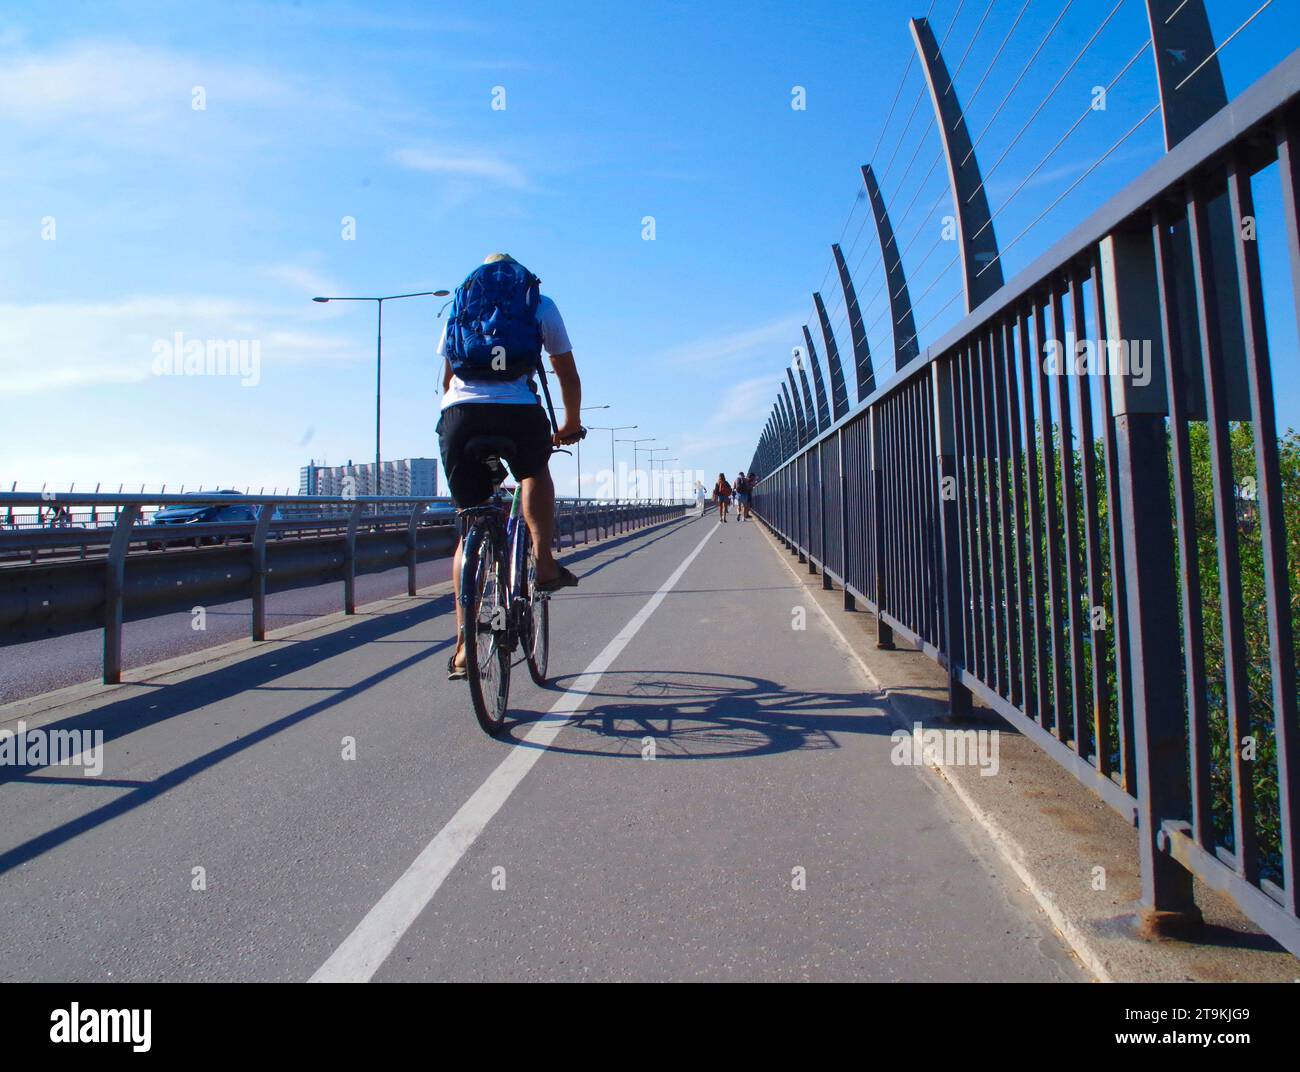 Bicycling along road in summertime. Stock Photo